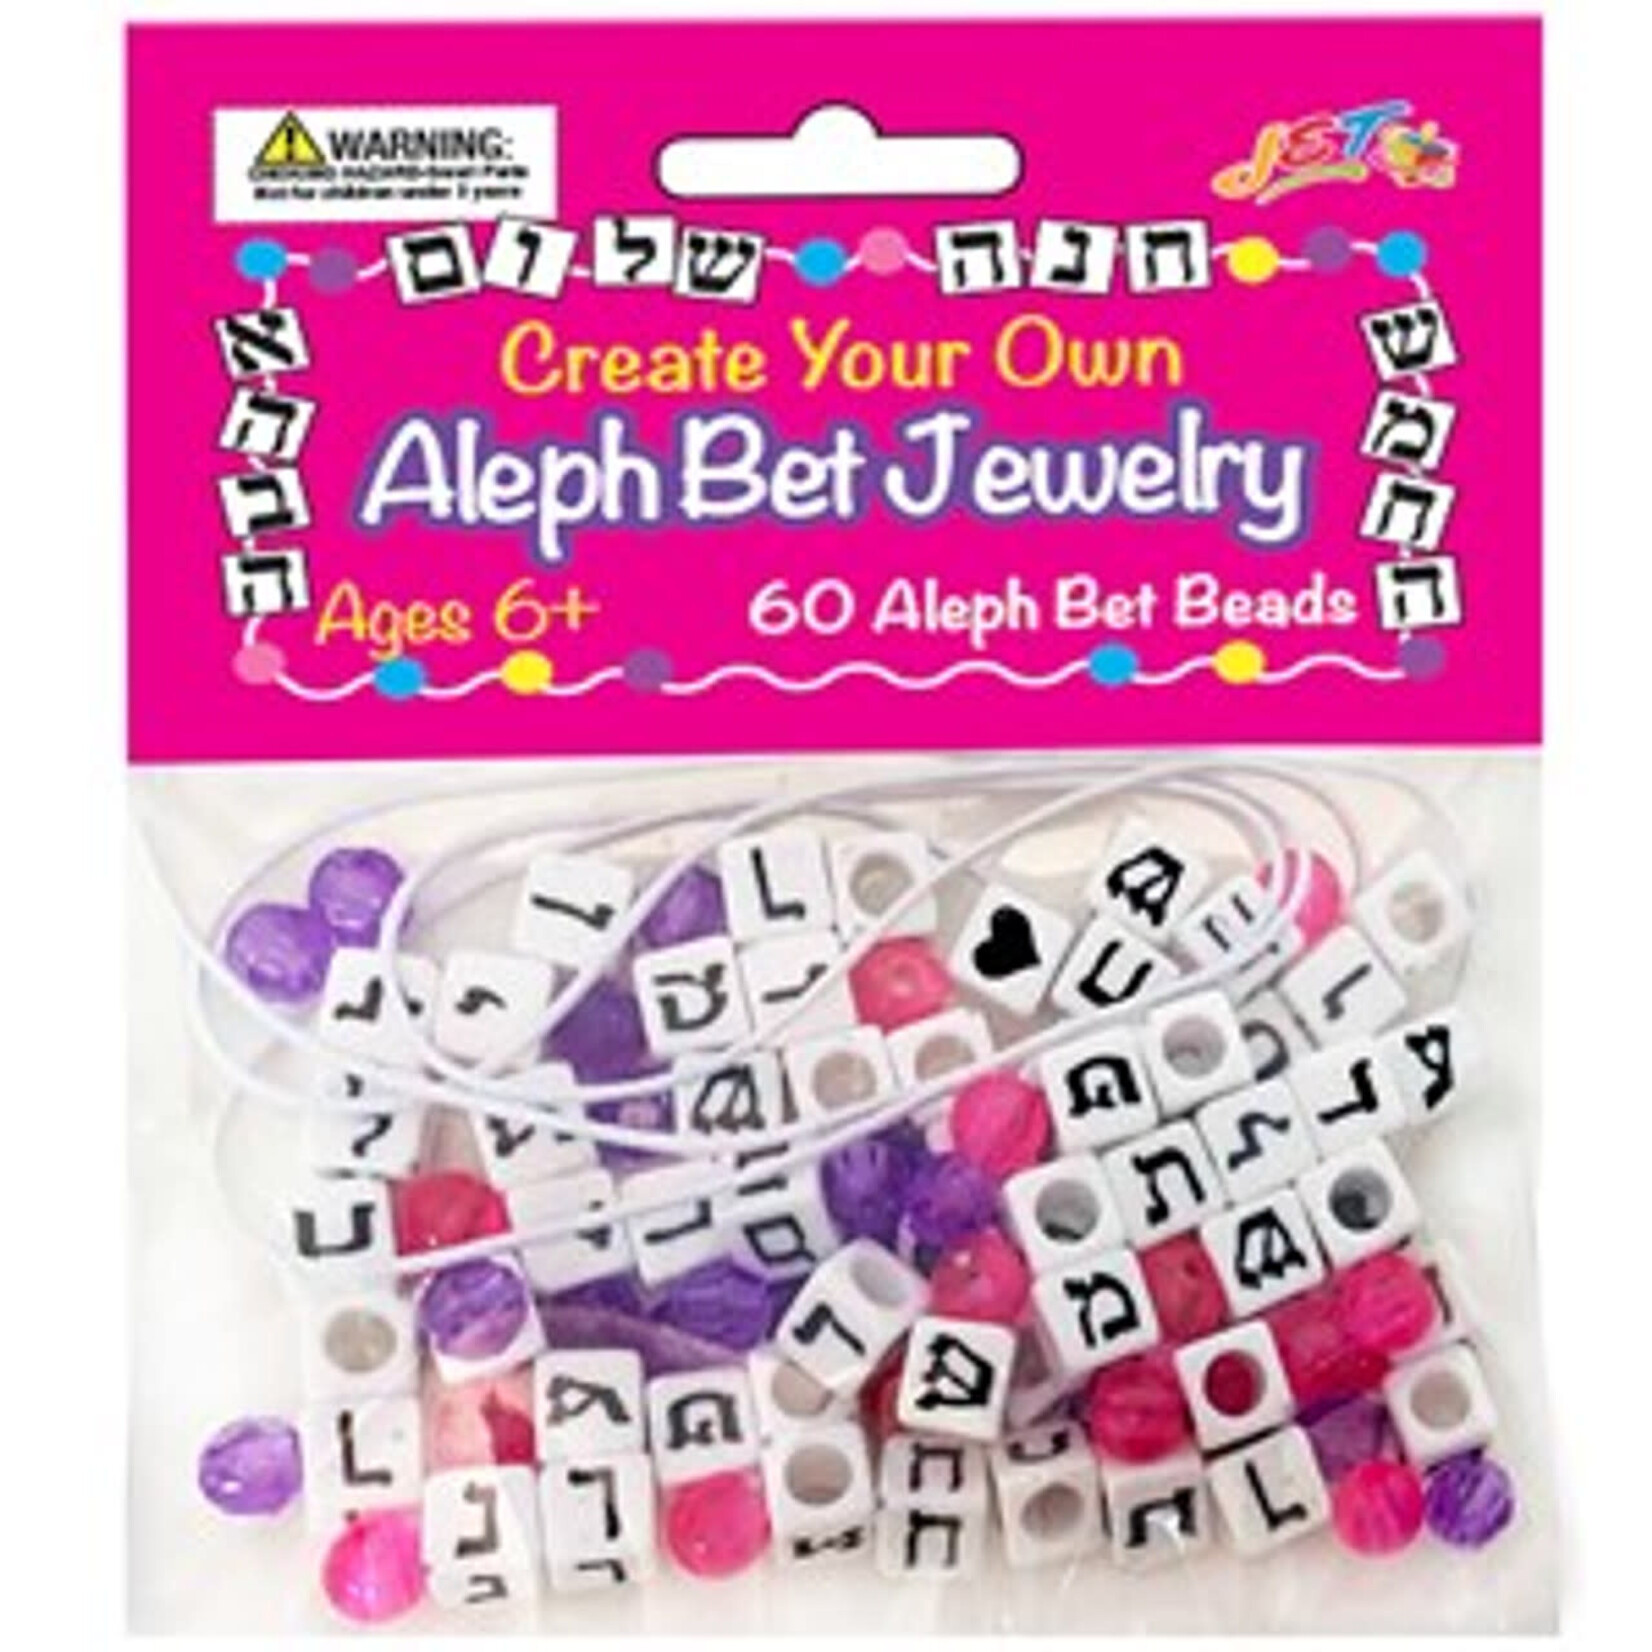 Create-Your-Own Aleph Bet Jewellery